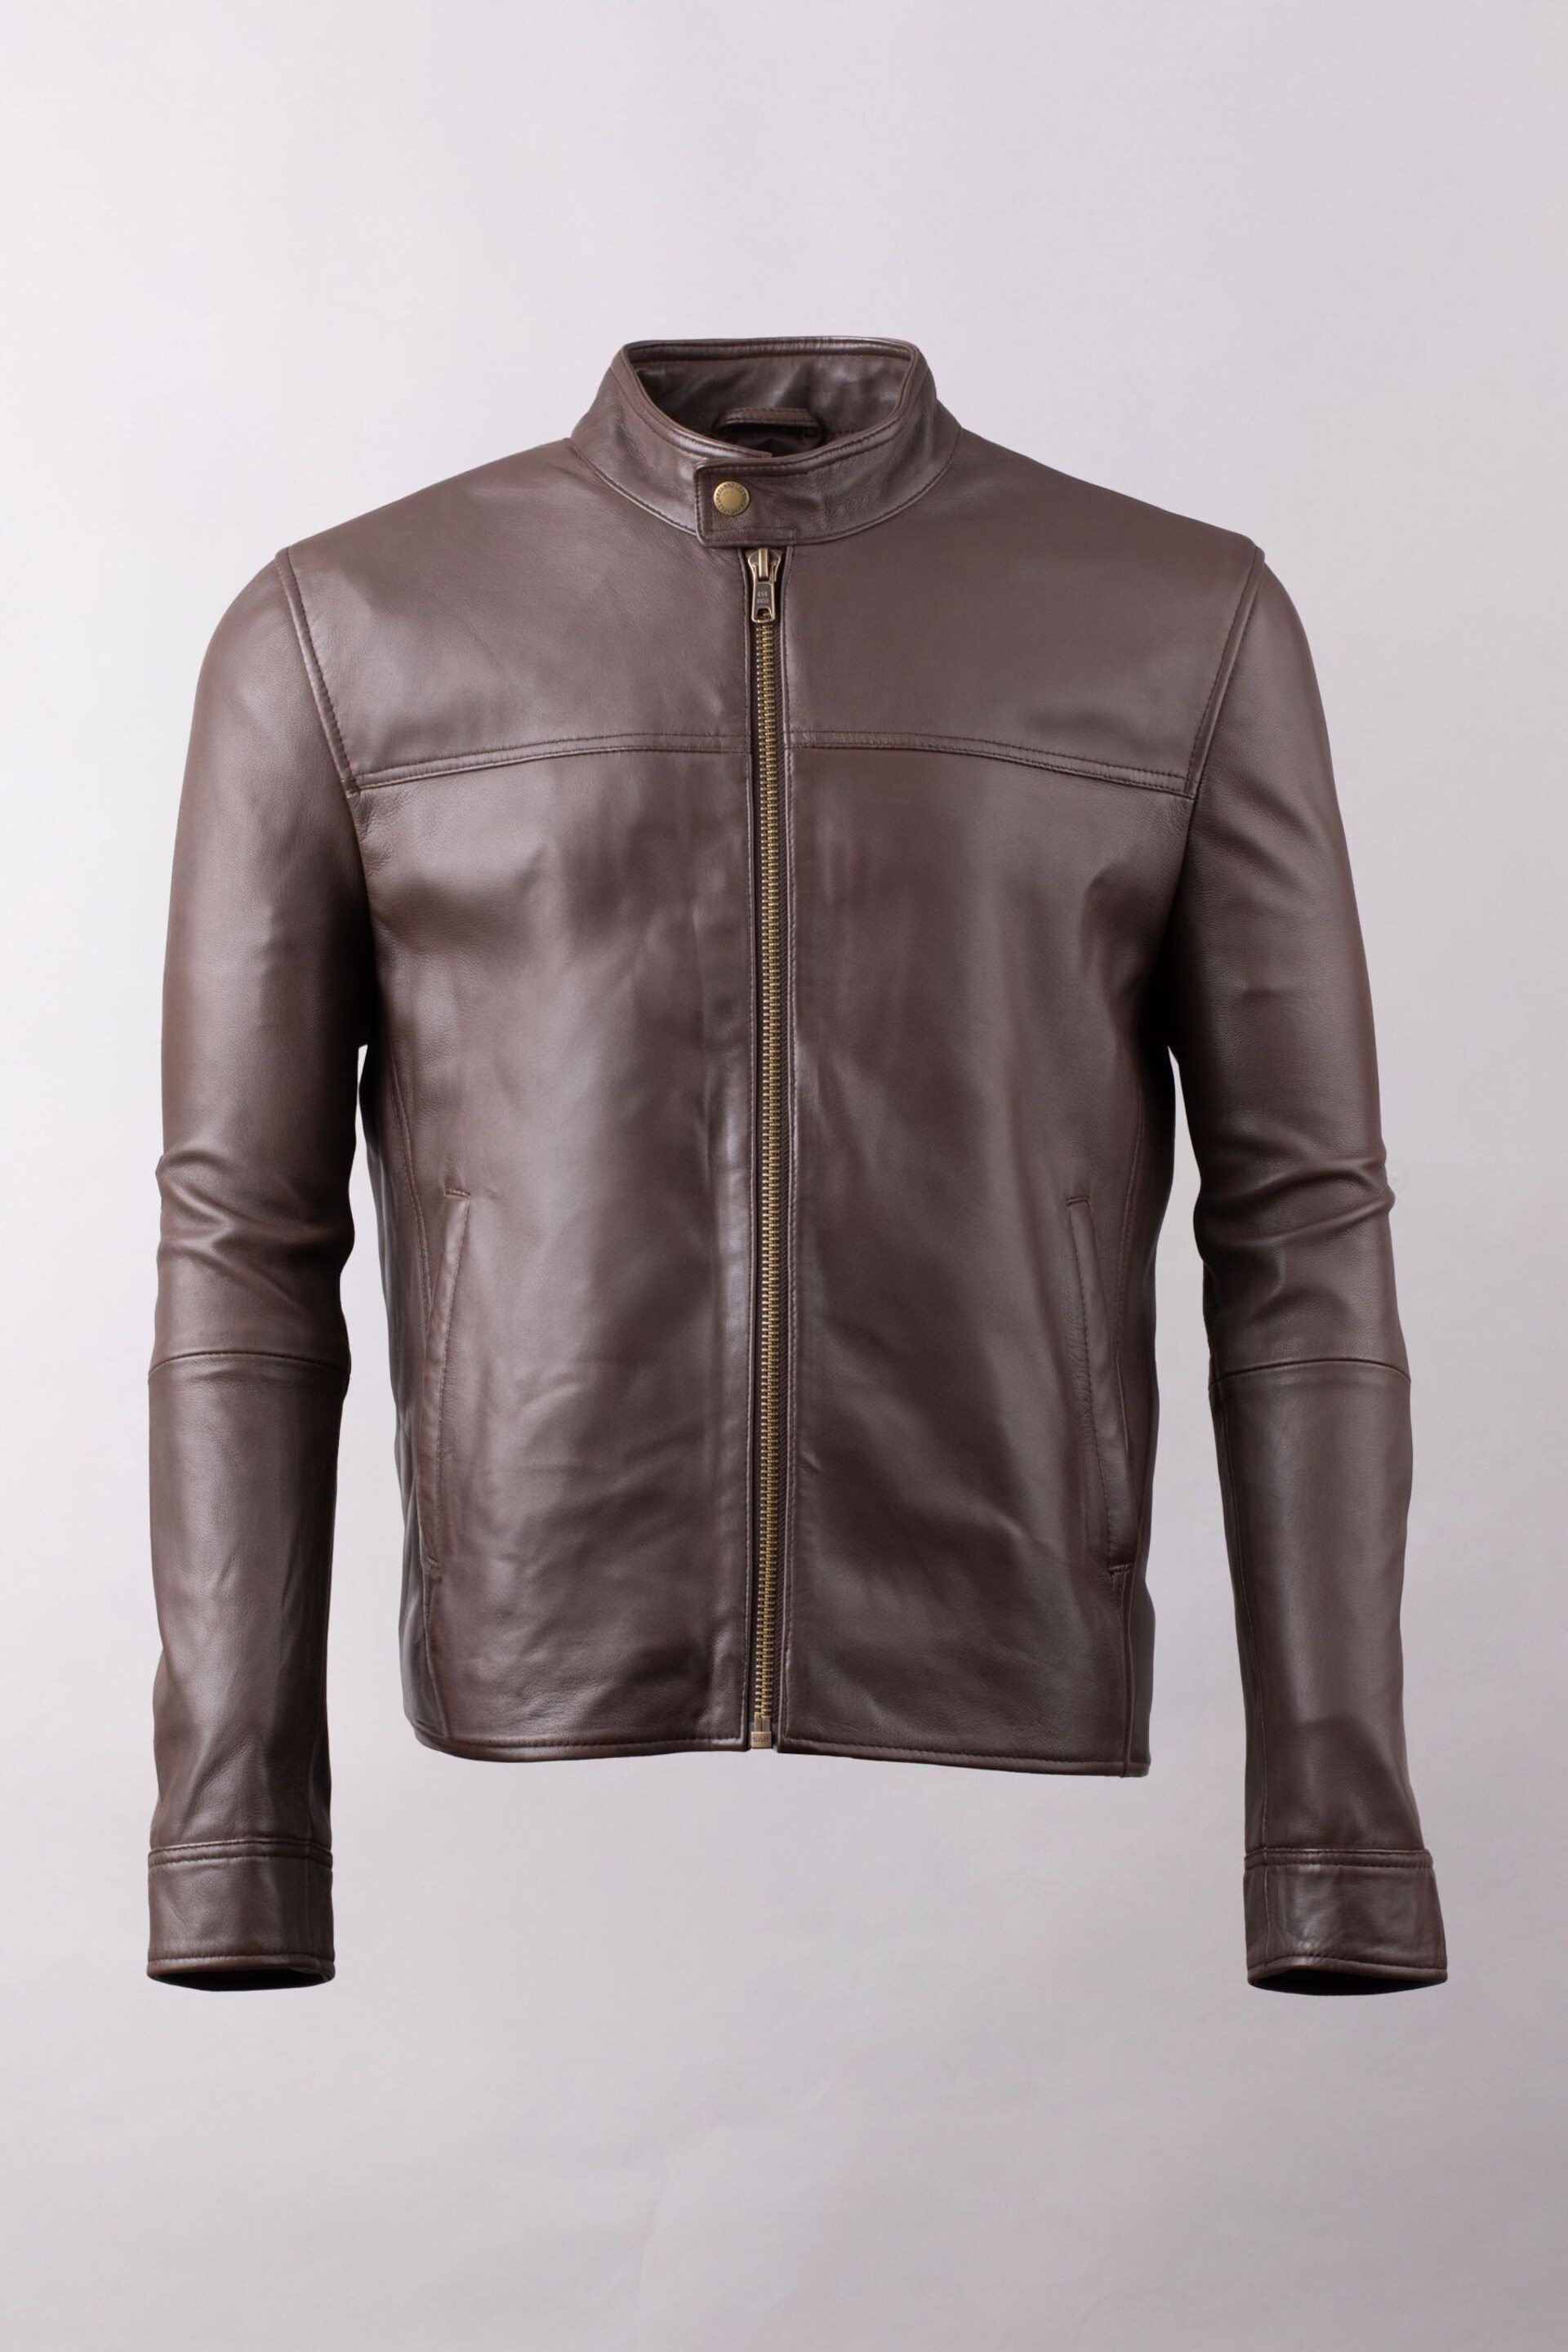 Lakeland Leather Brown Corby Leather Jacket - Image 4 of 9